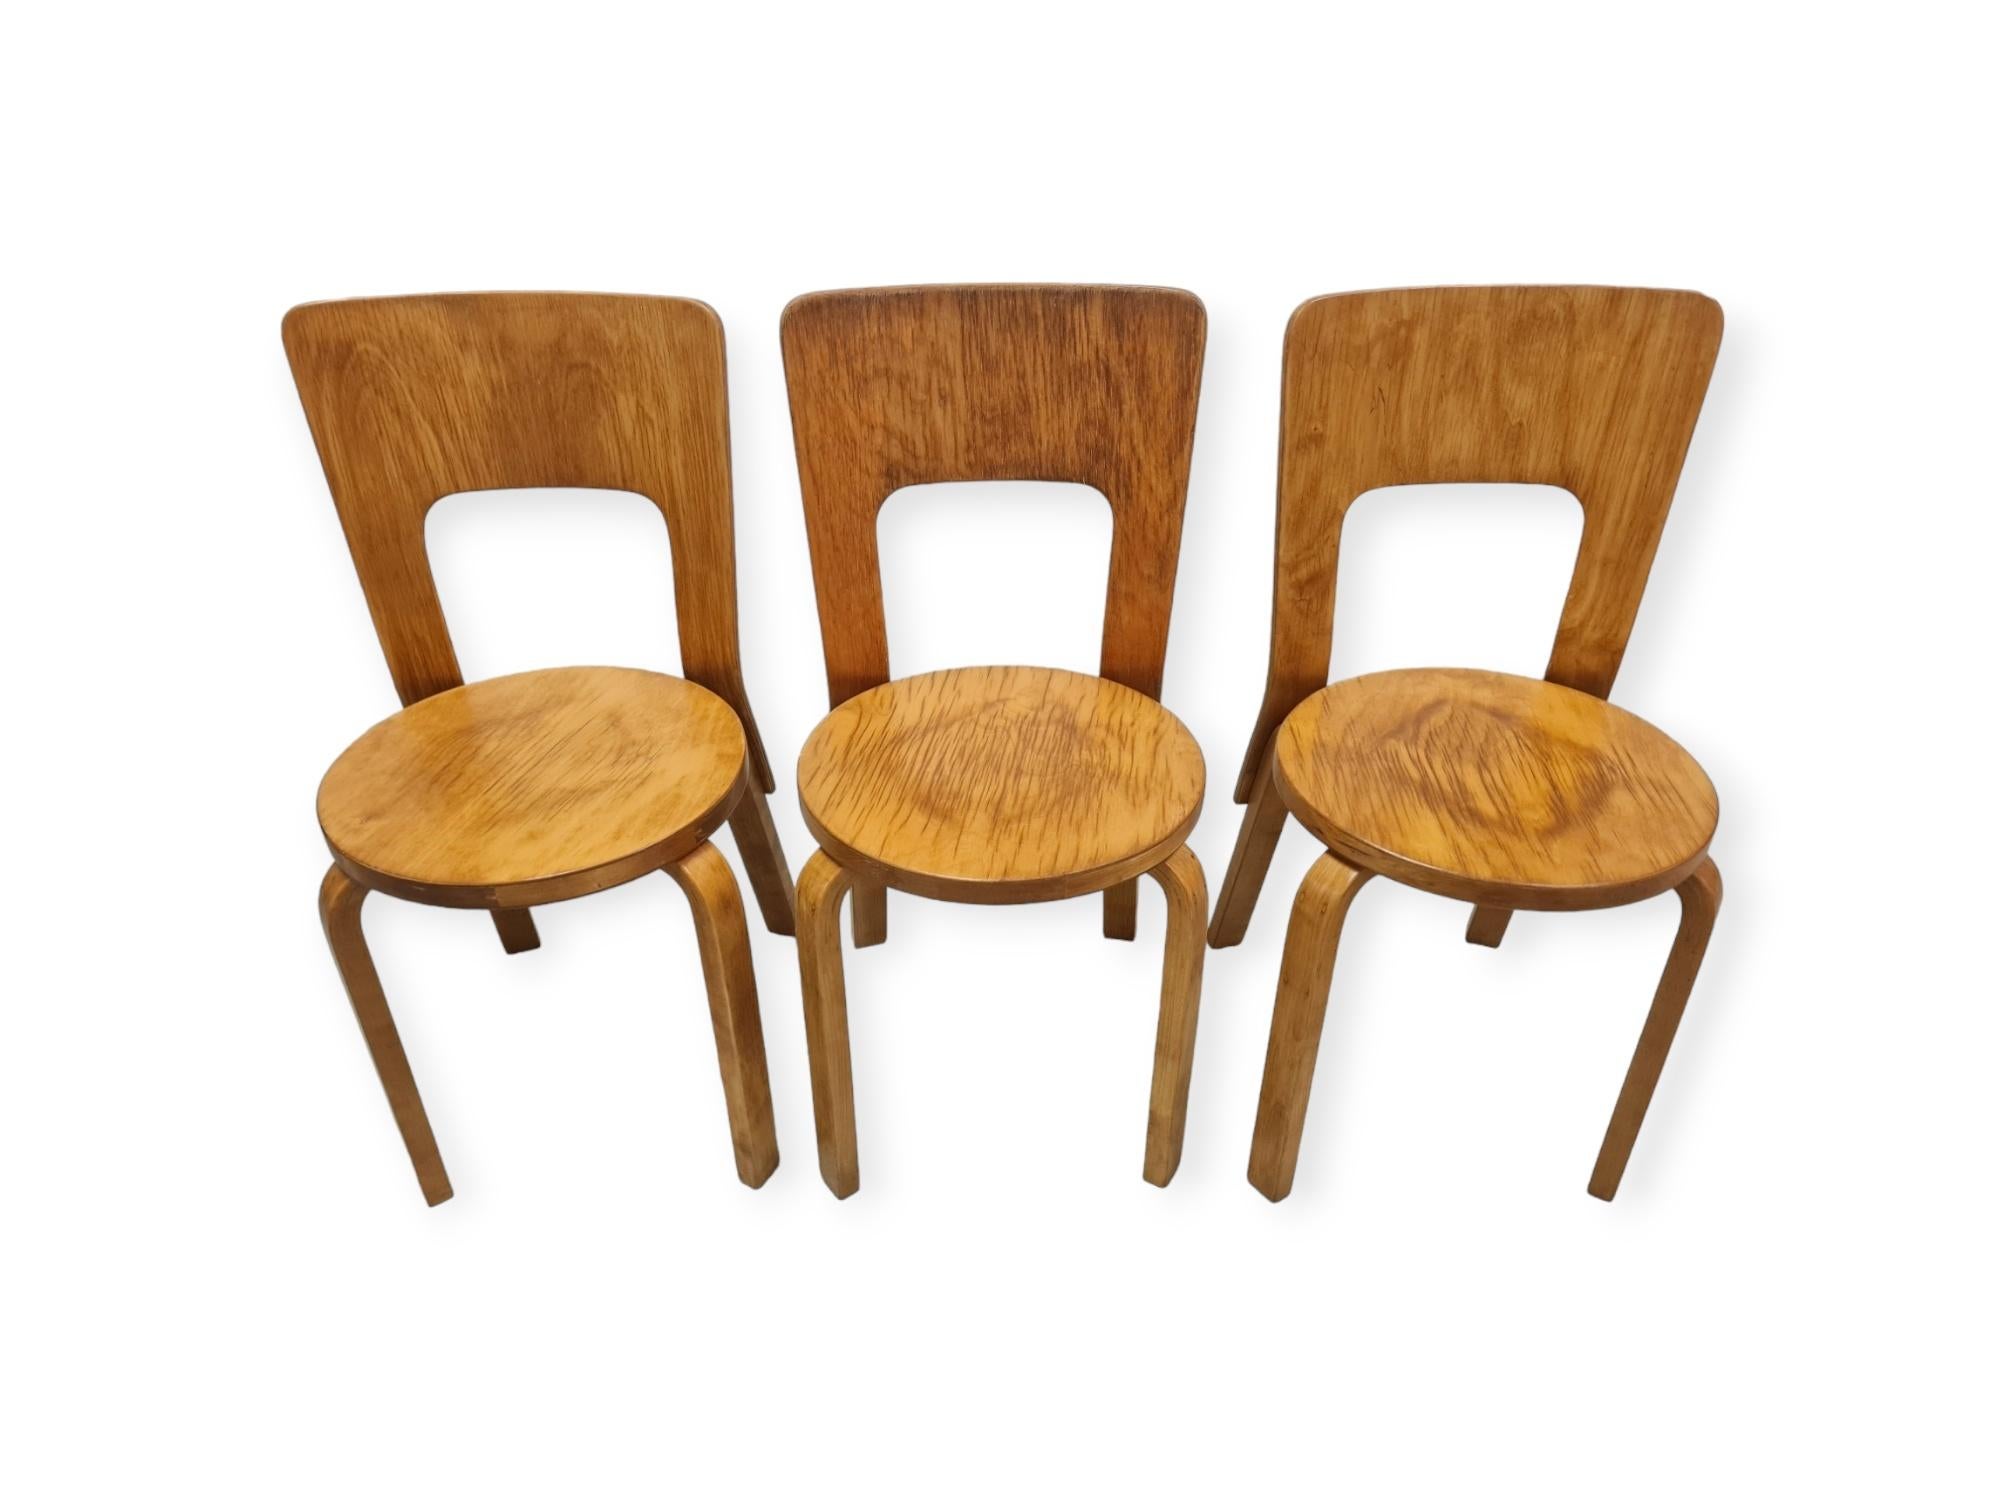 Alvar Aalto Dinning Set with Lazy Susan and 6 Model 66 chairs, 1940s For Sale 9